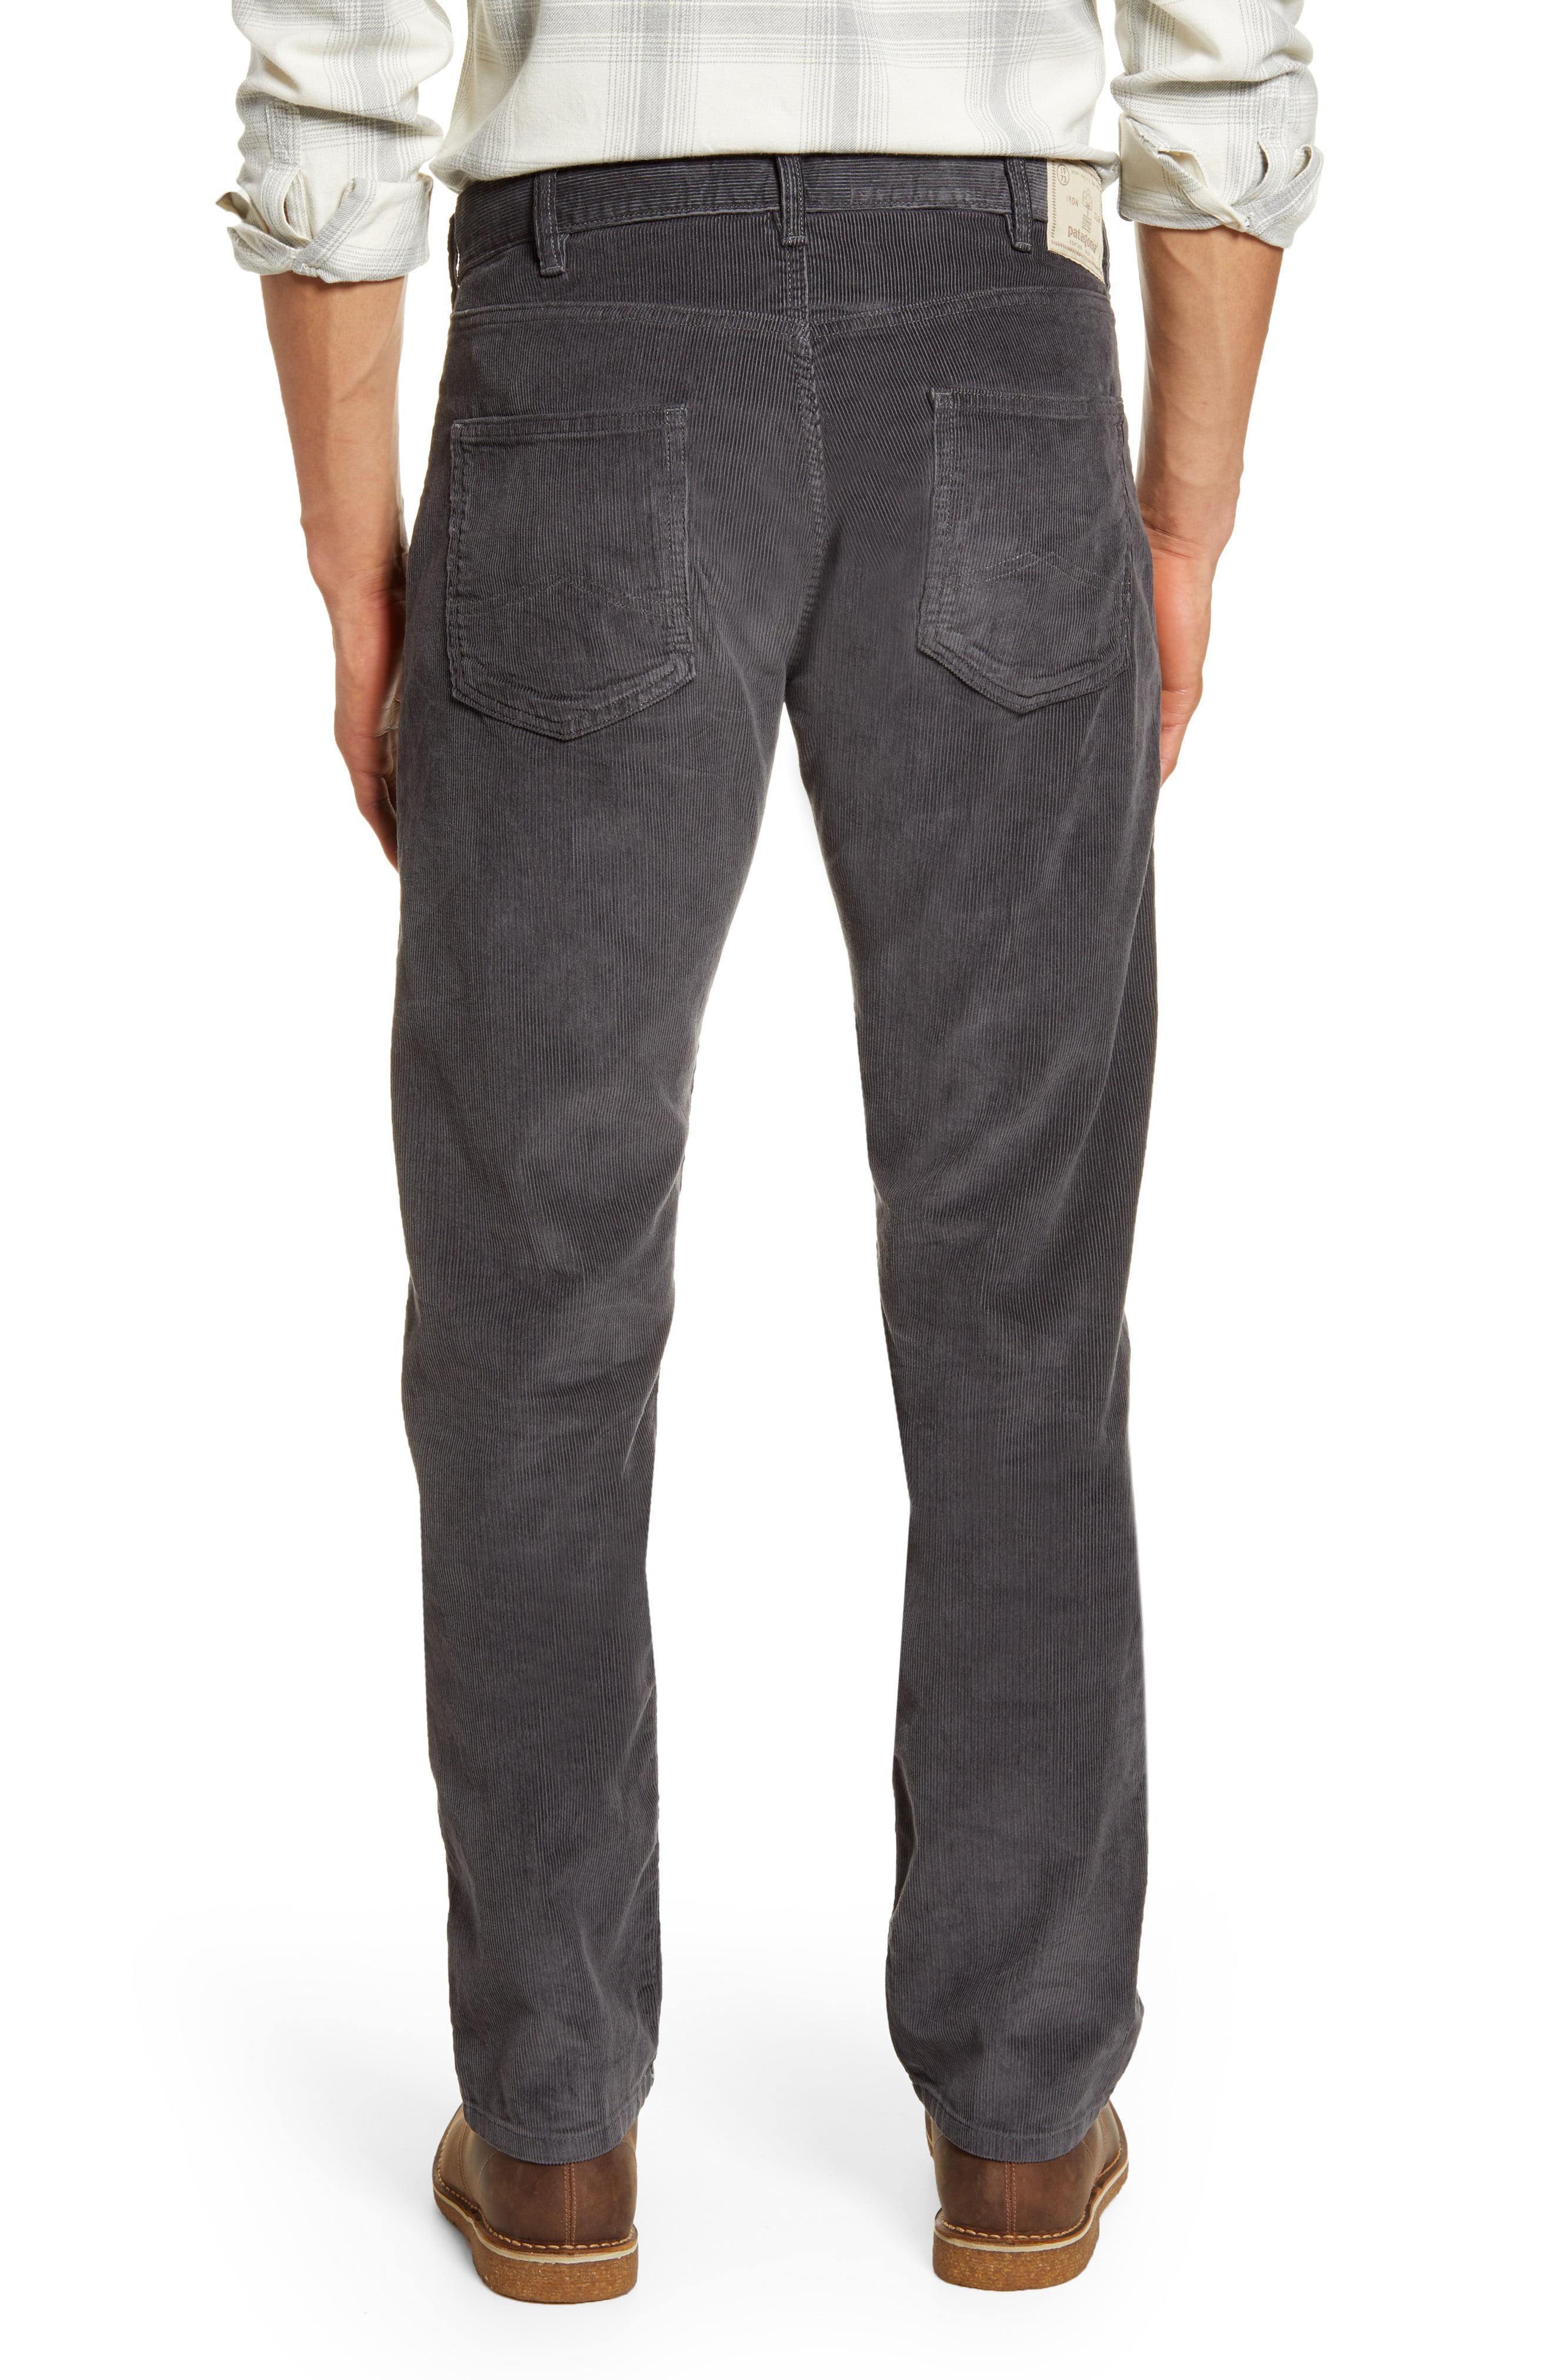 Patagonia Straight Fit Corduroy Pants in Grey (Gray) for Men - Lyst